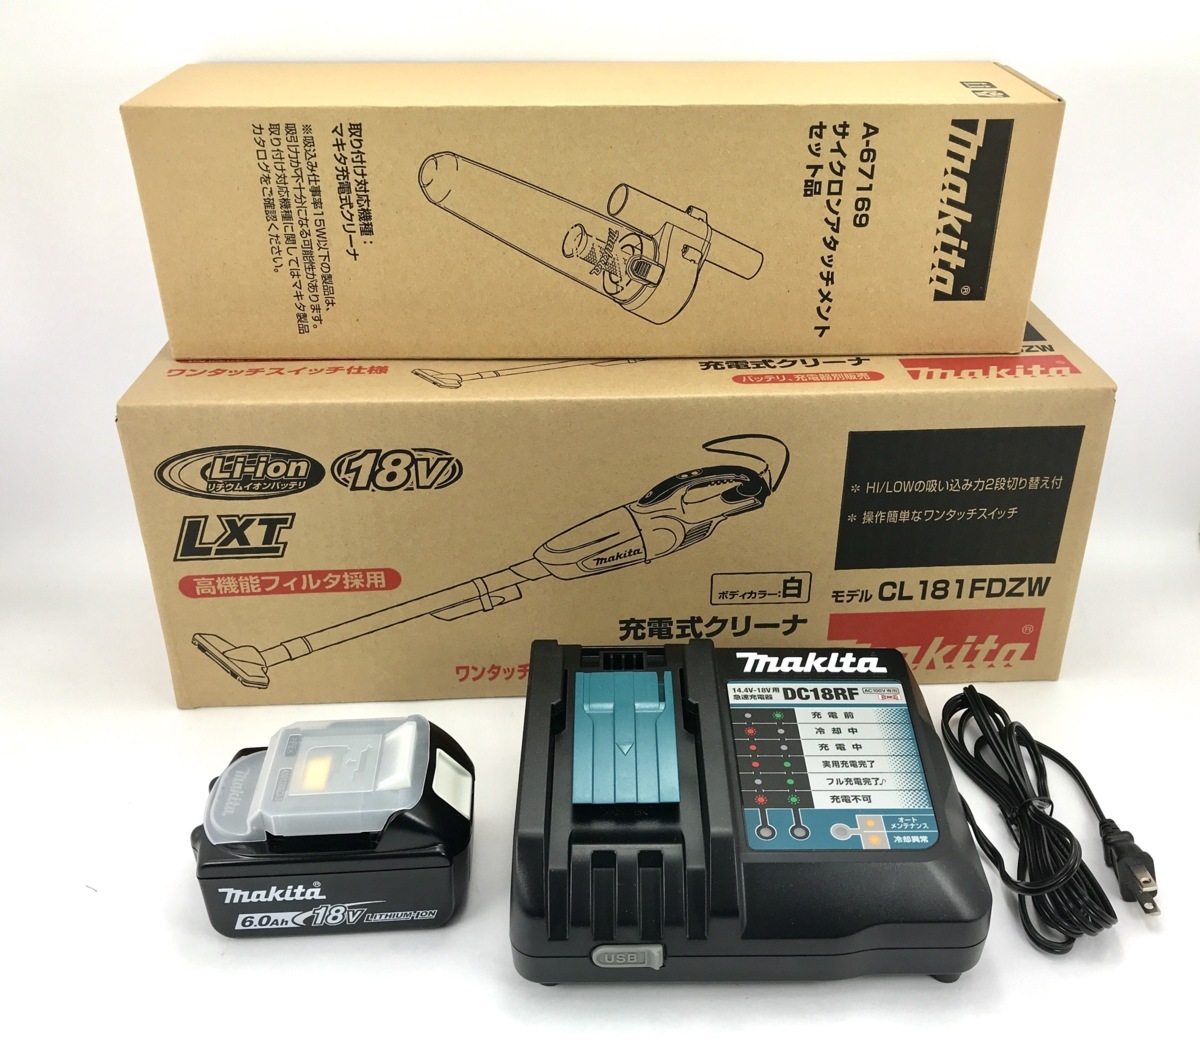  new goods Makita rechargeable cleaner CL181FDZW body + battery BL1860B + charger DC18RF + Cyclone Attachment ( 18V 6.0Ah battery )